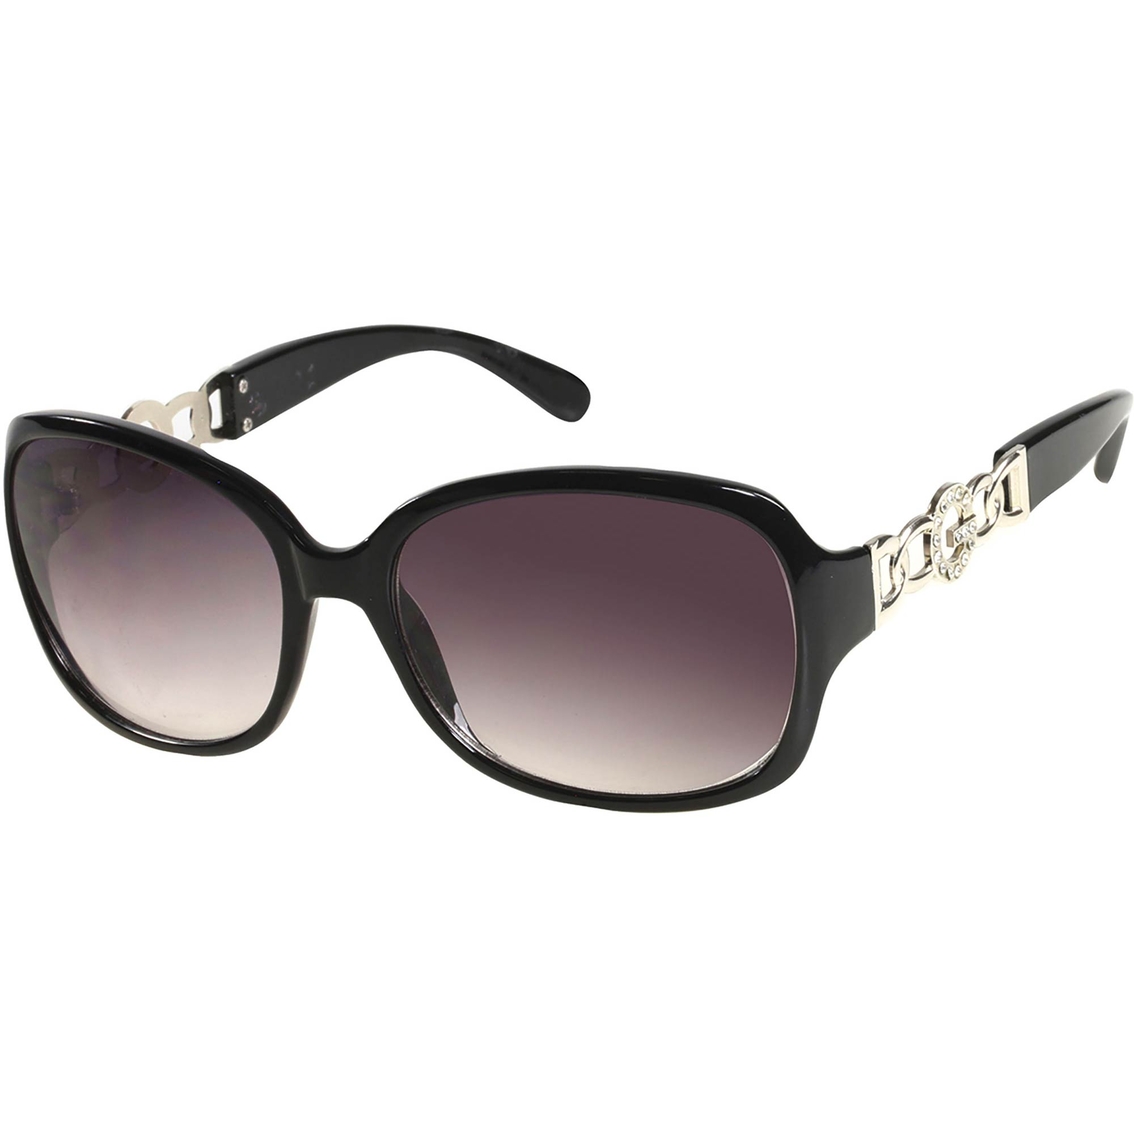 Guess Plastic Rectangle Polycarbonate Sunglasses Gg 1101 | Atg Archive ...